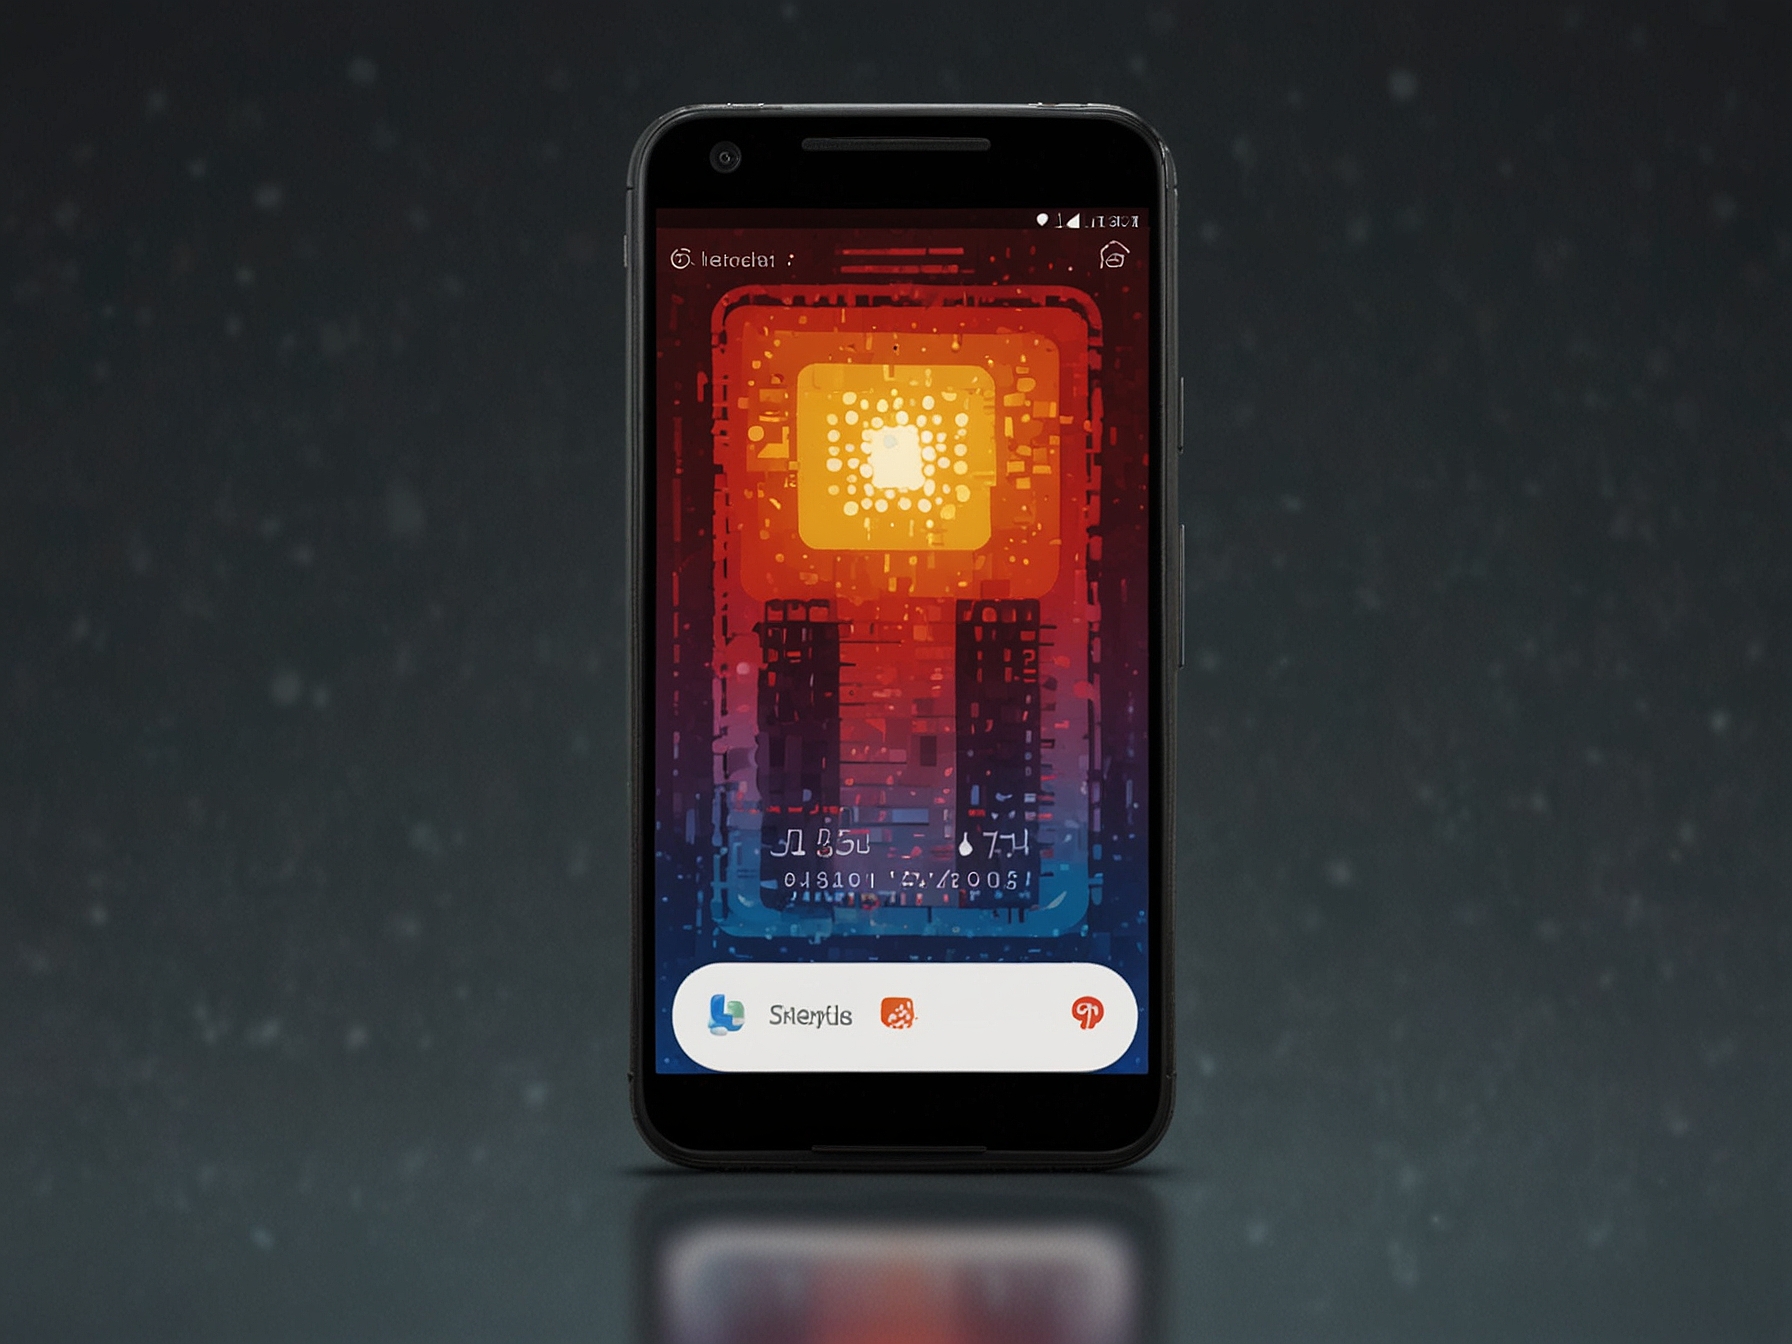 Illustration showing a Pixel smartphone with a notification alert about overheating, indicating Google's new Adaptive Thermal feature helping users manage device temperature.